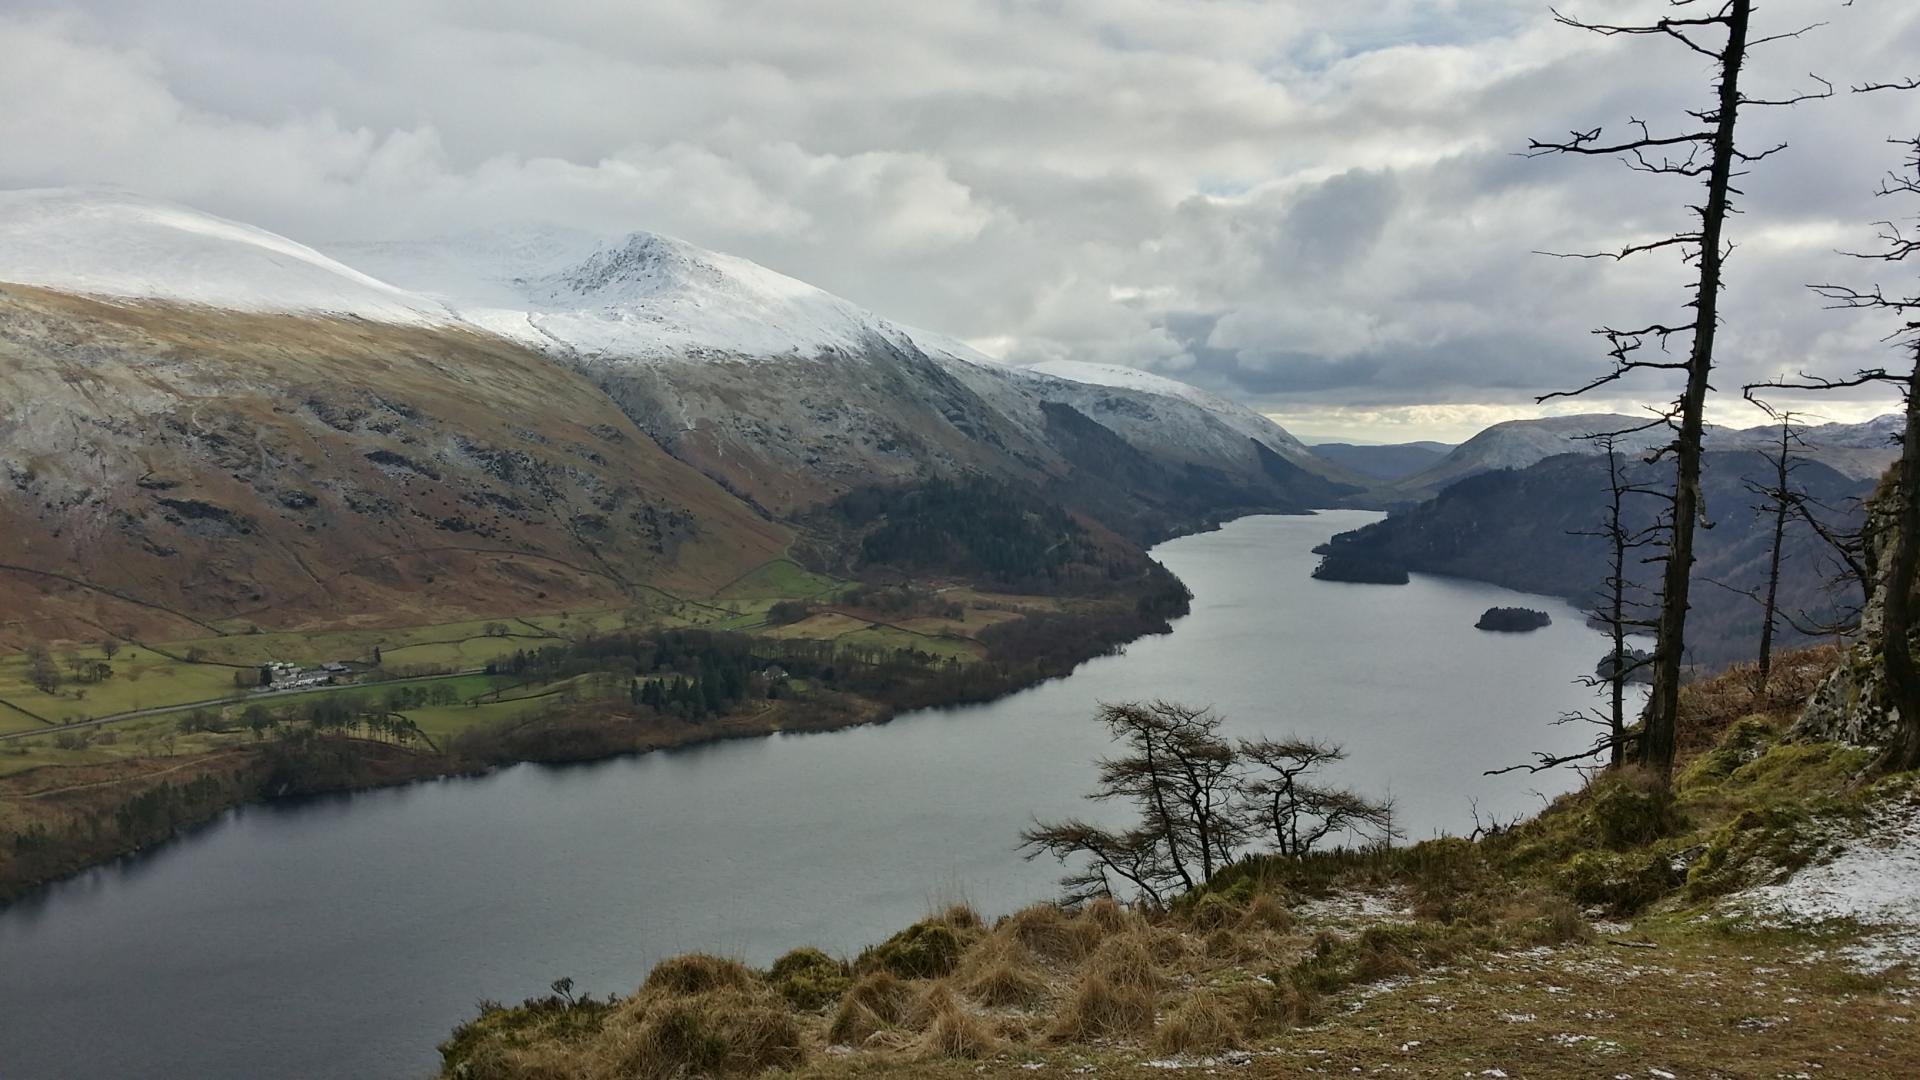 Stunning views of the man-made reservoir from Raven Crag